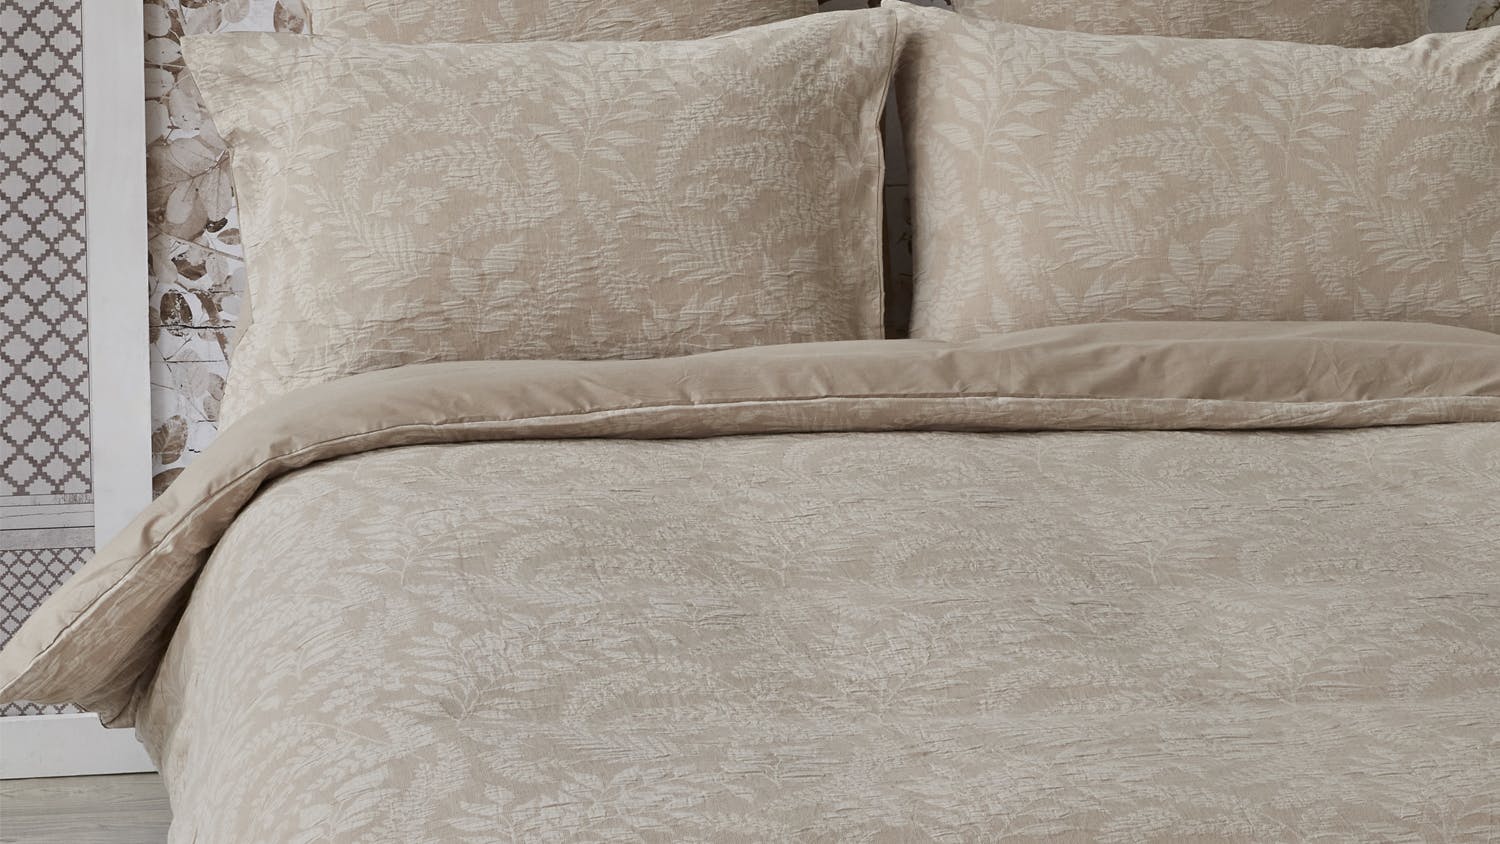 Willow Natural Duvet Cover Set by Luxotic